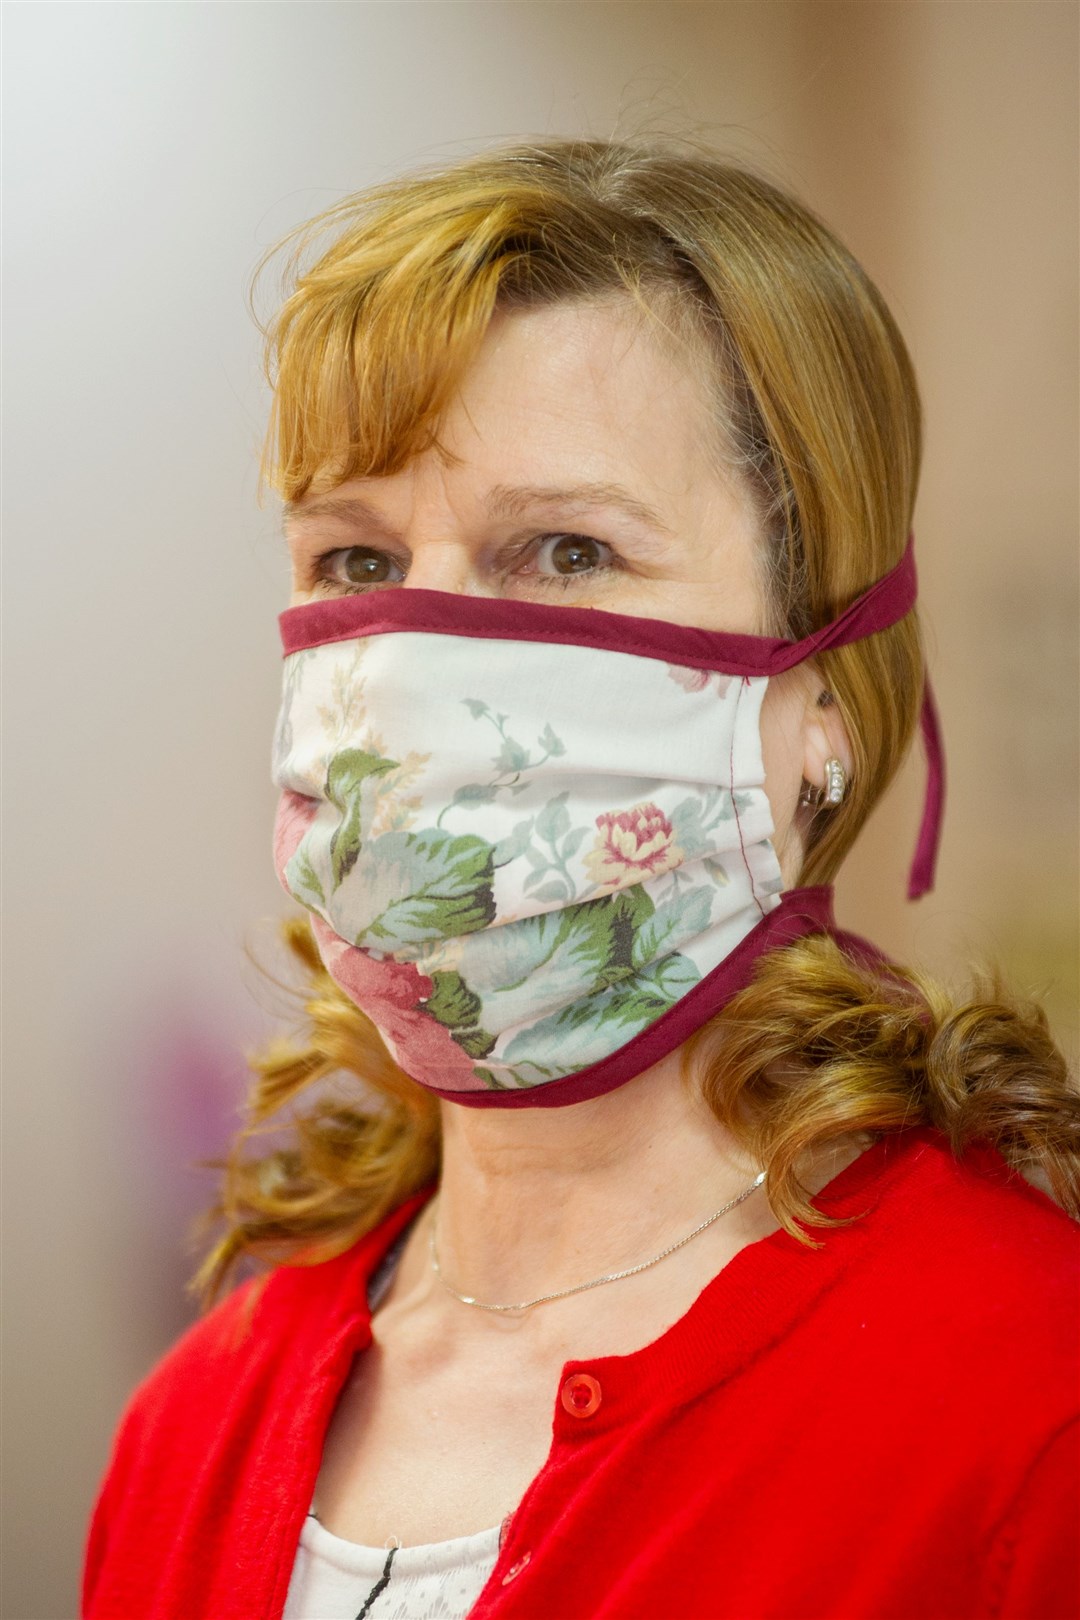 Maureen Halkett, owner of Unique Ladieswear in Lossiemouth, is co-leading a hardworking volunteer team as part of Moray Scrubs' co-ordinated effort. The group are now making masks as well as scrubs. Picture: Daniel Forsyth.